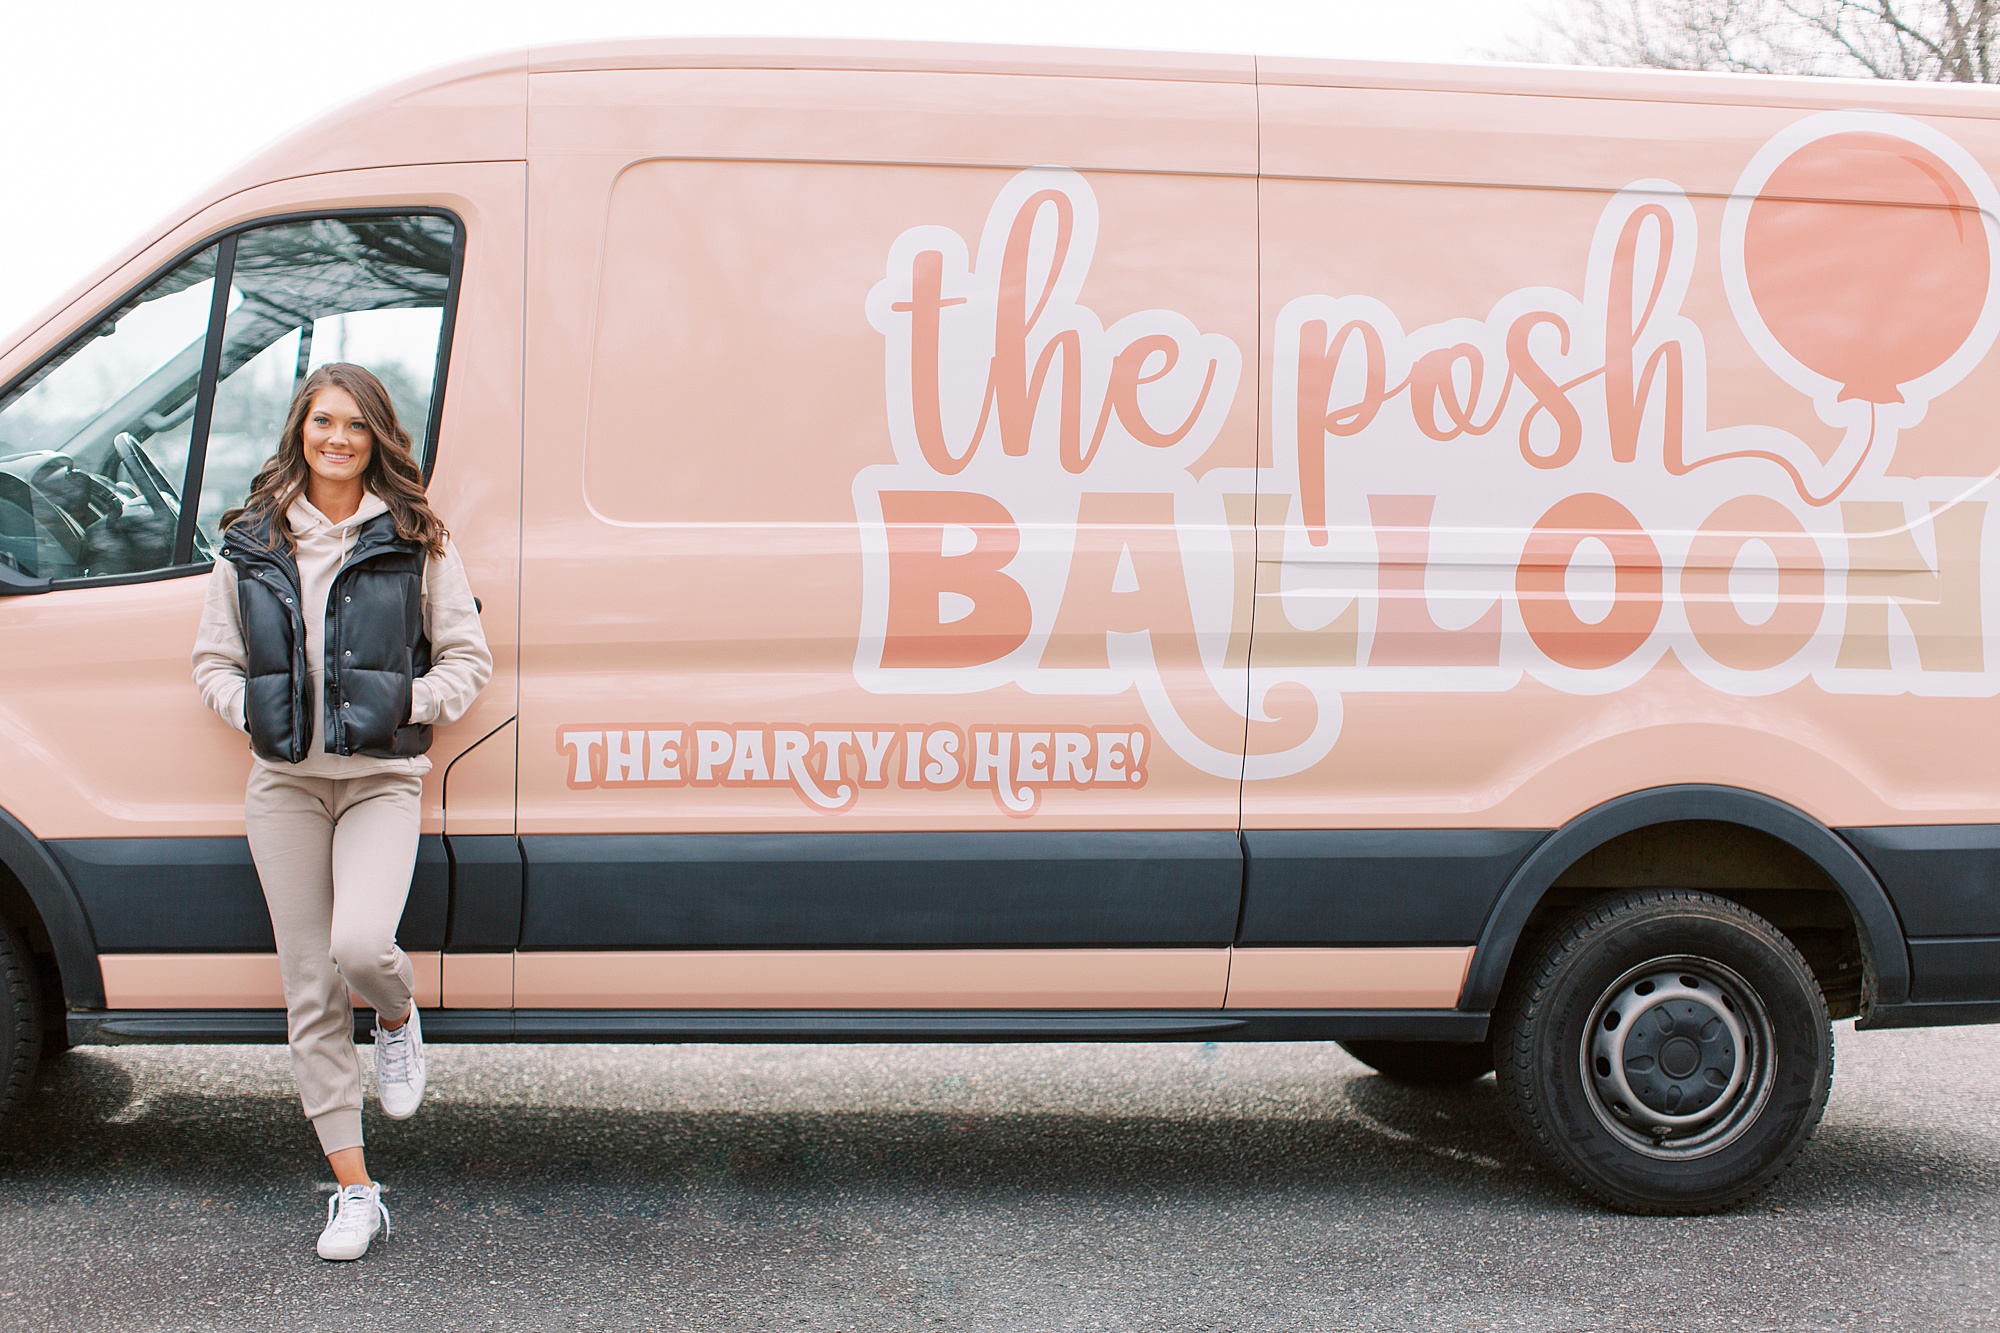 woman leans against pink van during balloon artist branding session